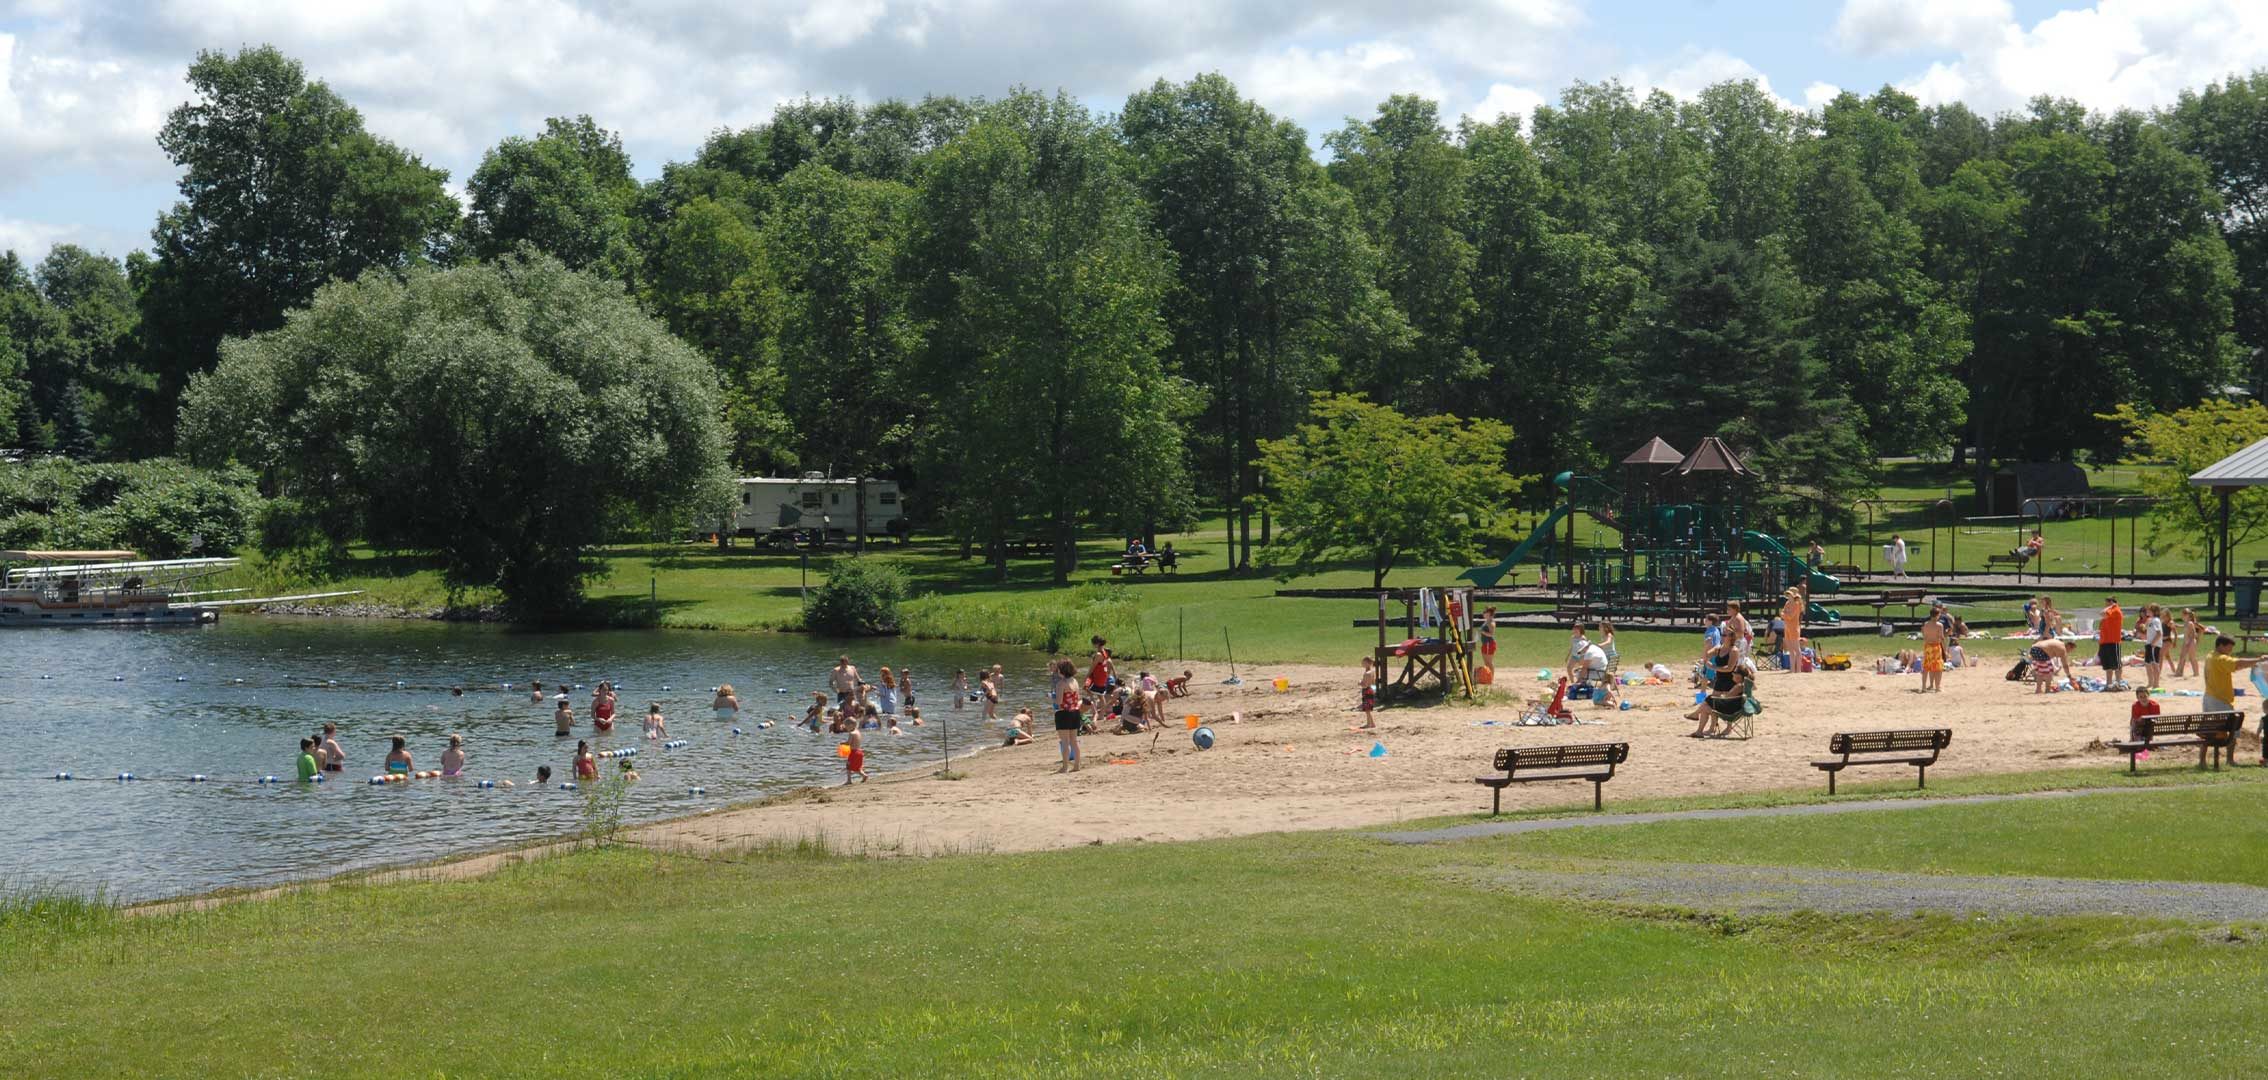 People cooling off in a recreational swimming pond